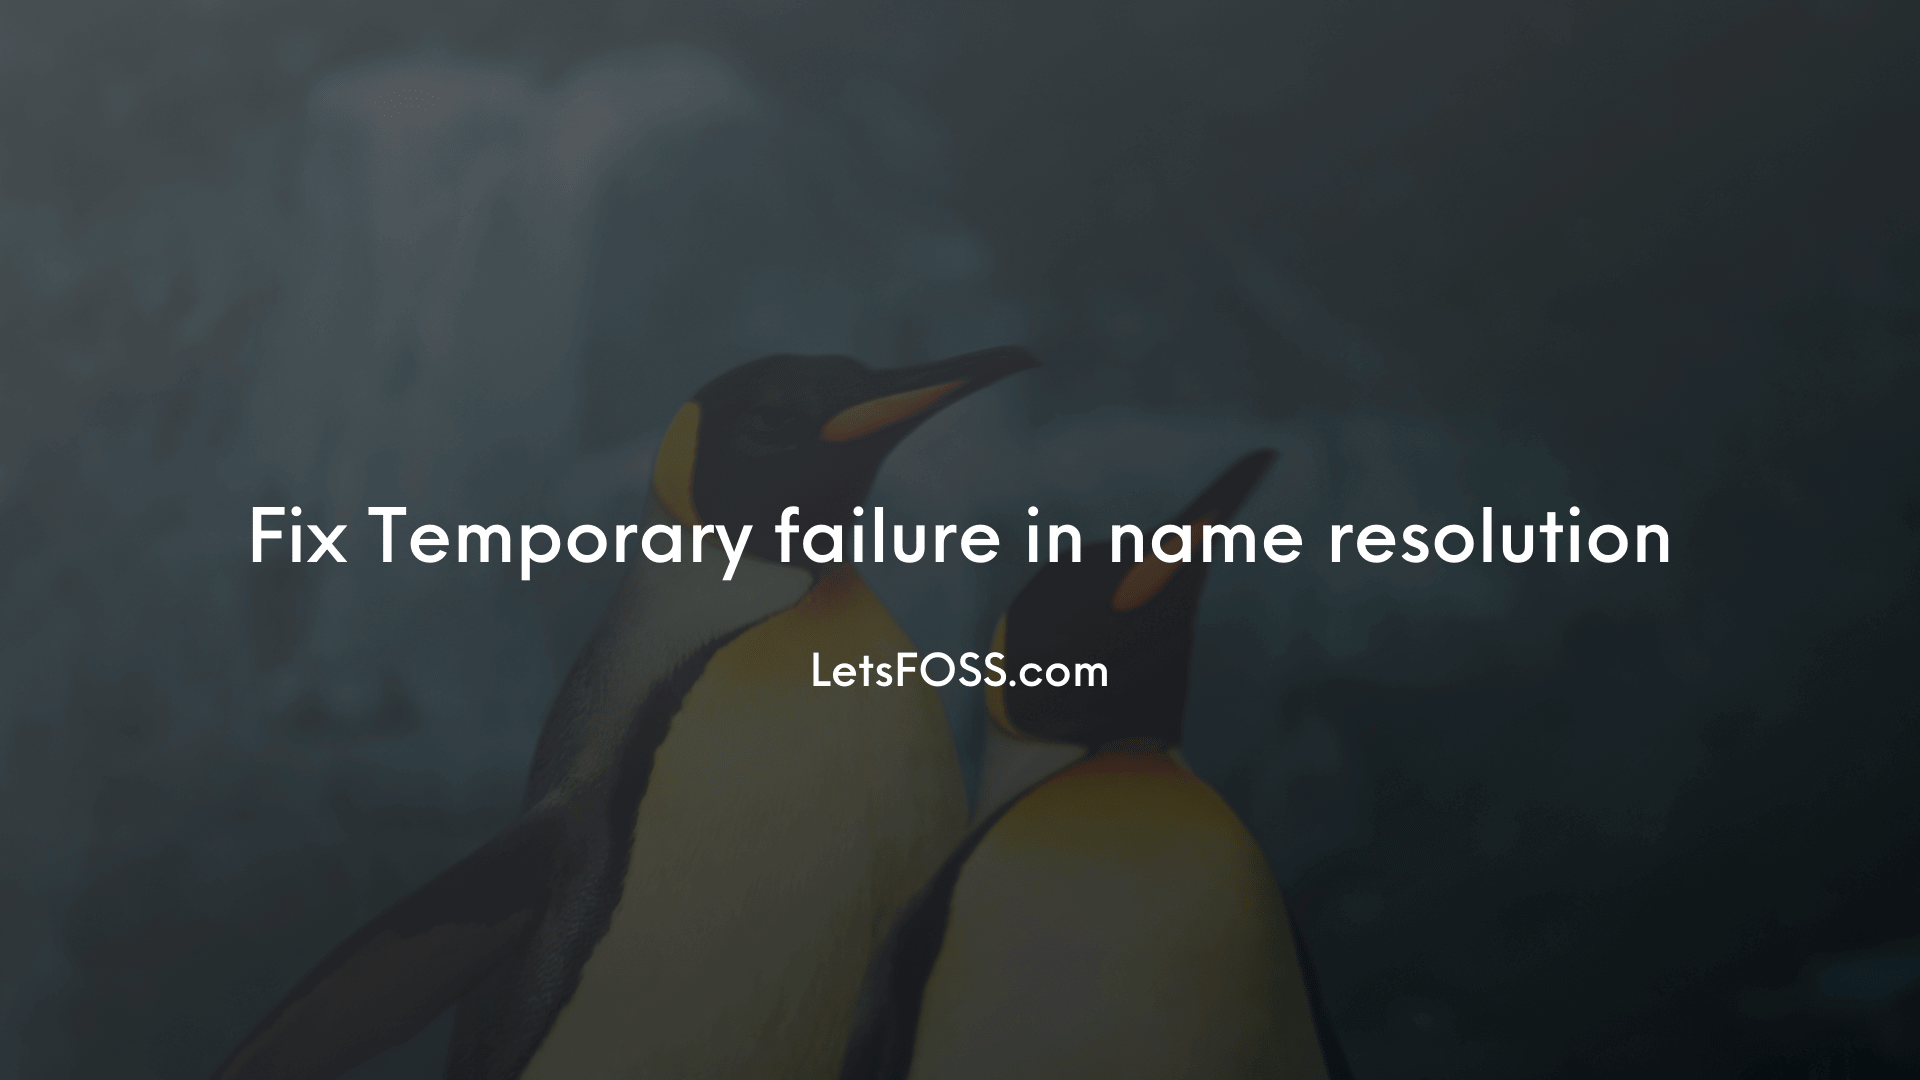 Temporary failure in name resolution